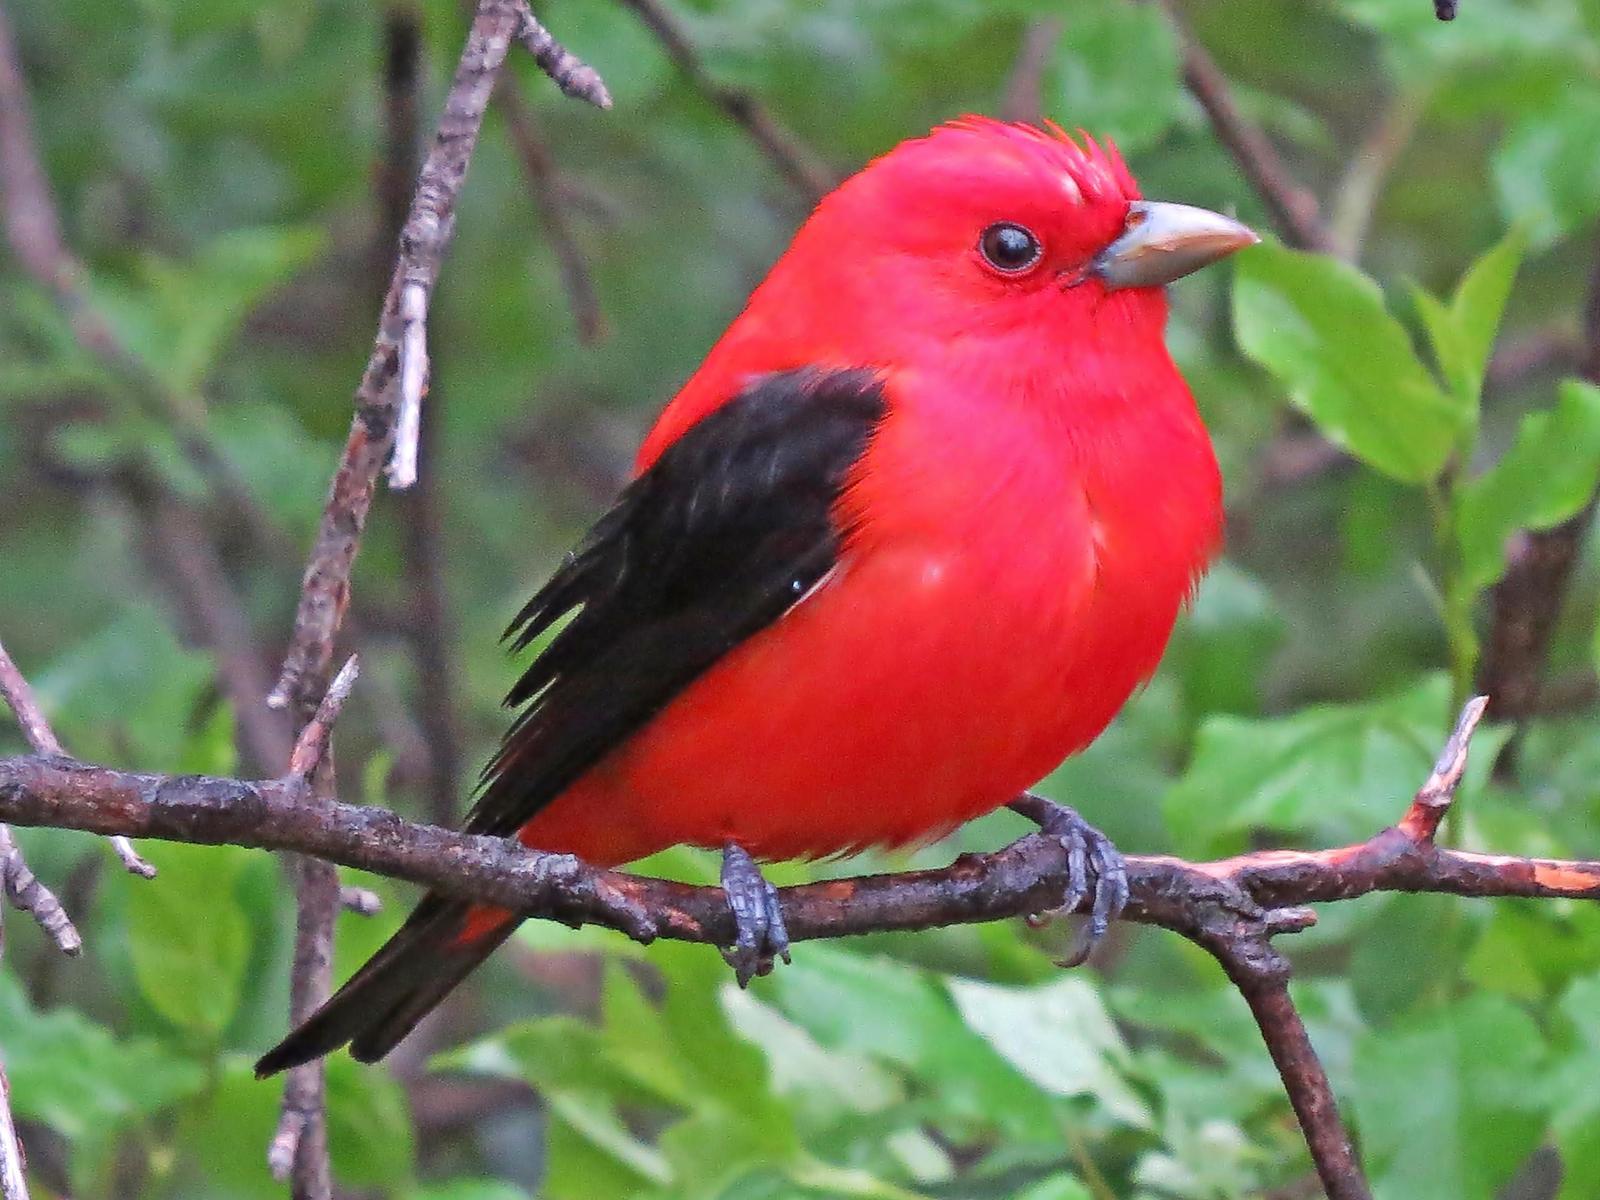 Scarlet Tanager Photo by Bob Neugebauer